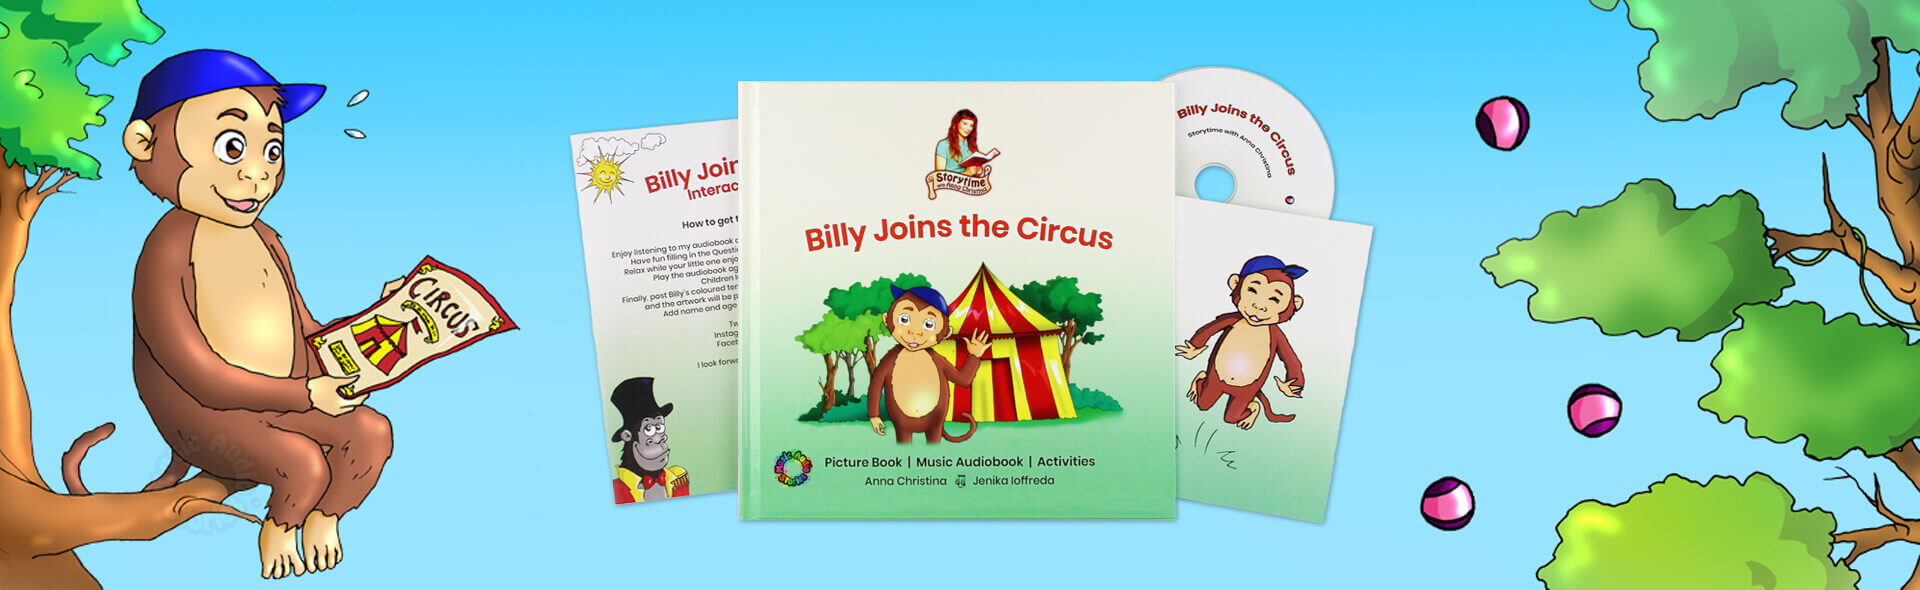 Billy Joins the Circus Hardback Picture Book promo image